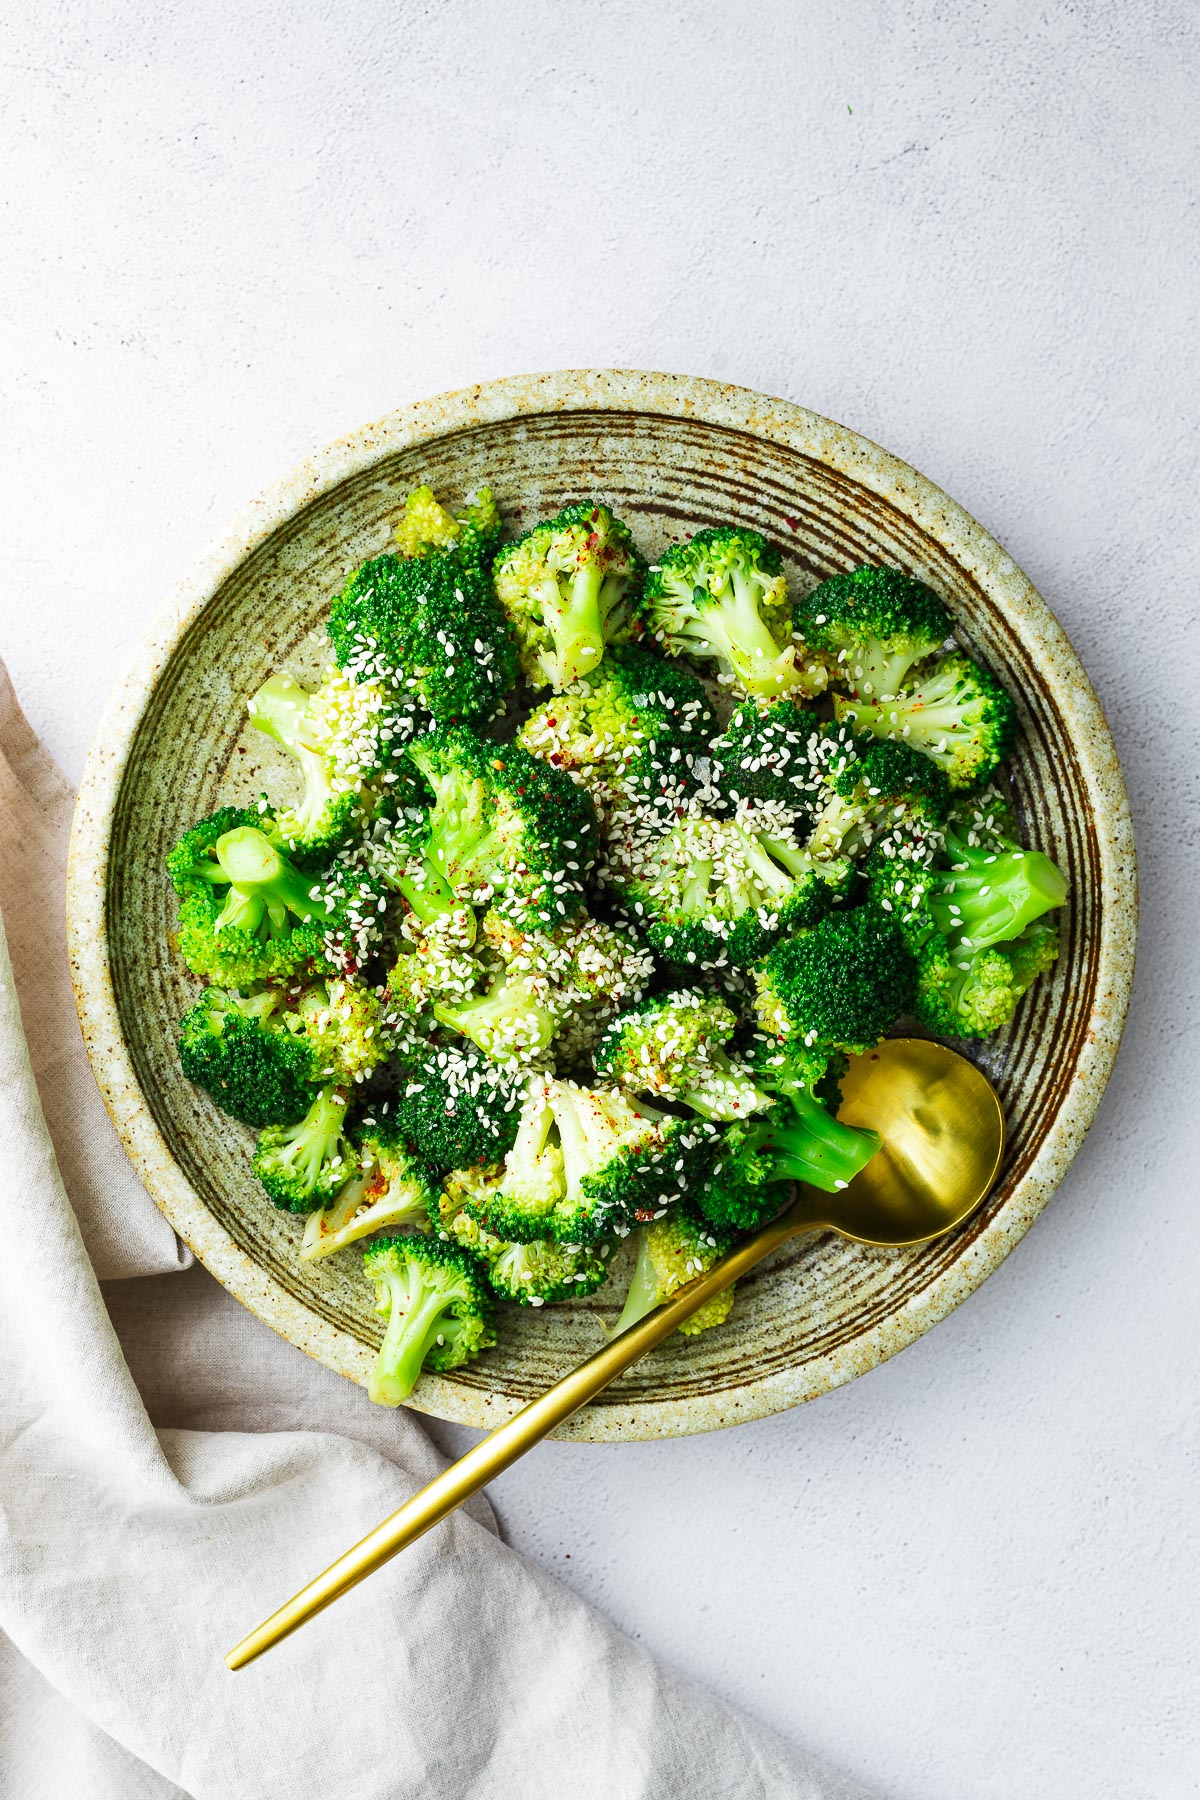 Steamed frozen broccoli with a sweet Asian dressing sprinkled with sesame seeds, served on a ceramic plate with a gold spoon.